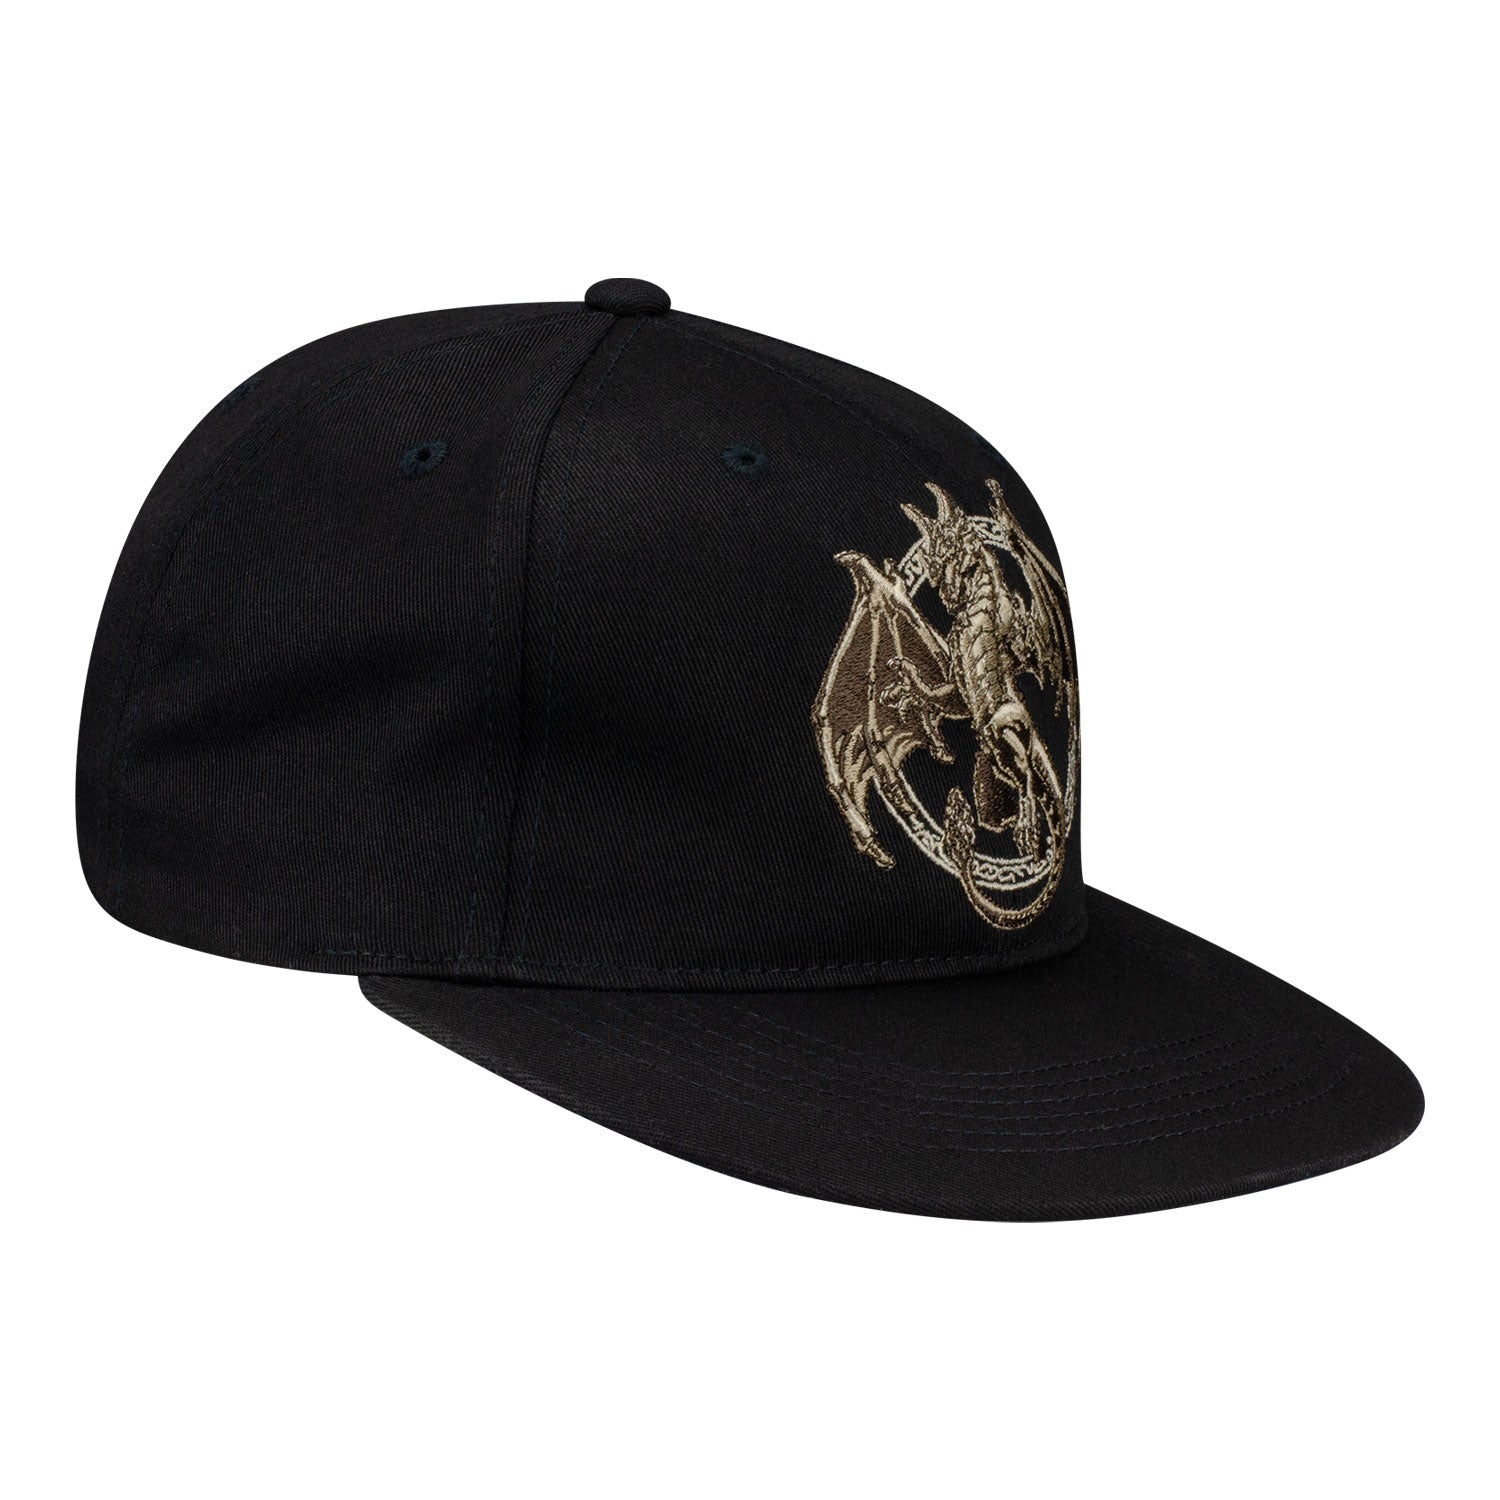 World of Warcraft Wrathion Snapback Hat - Side View